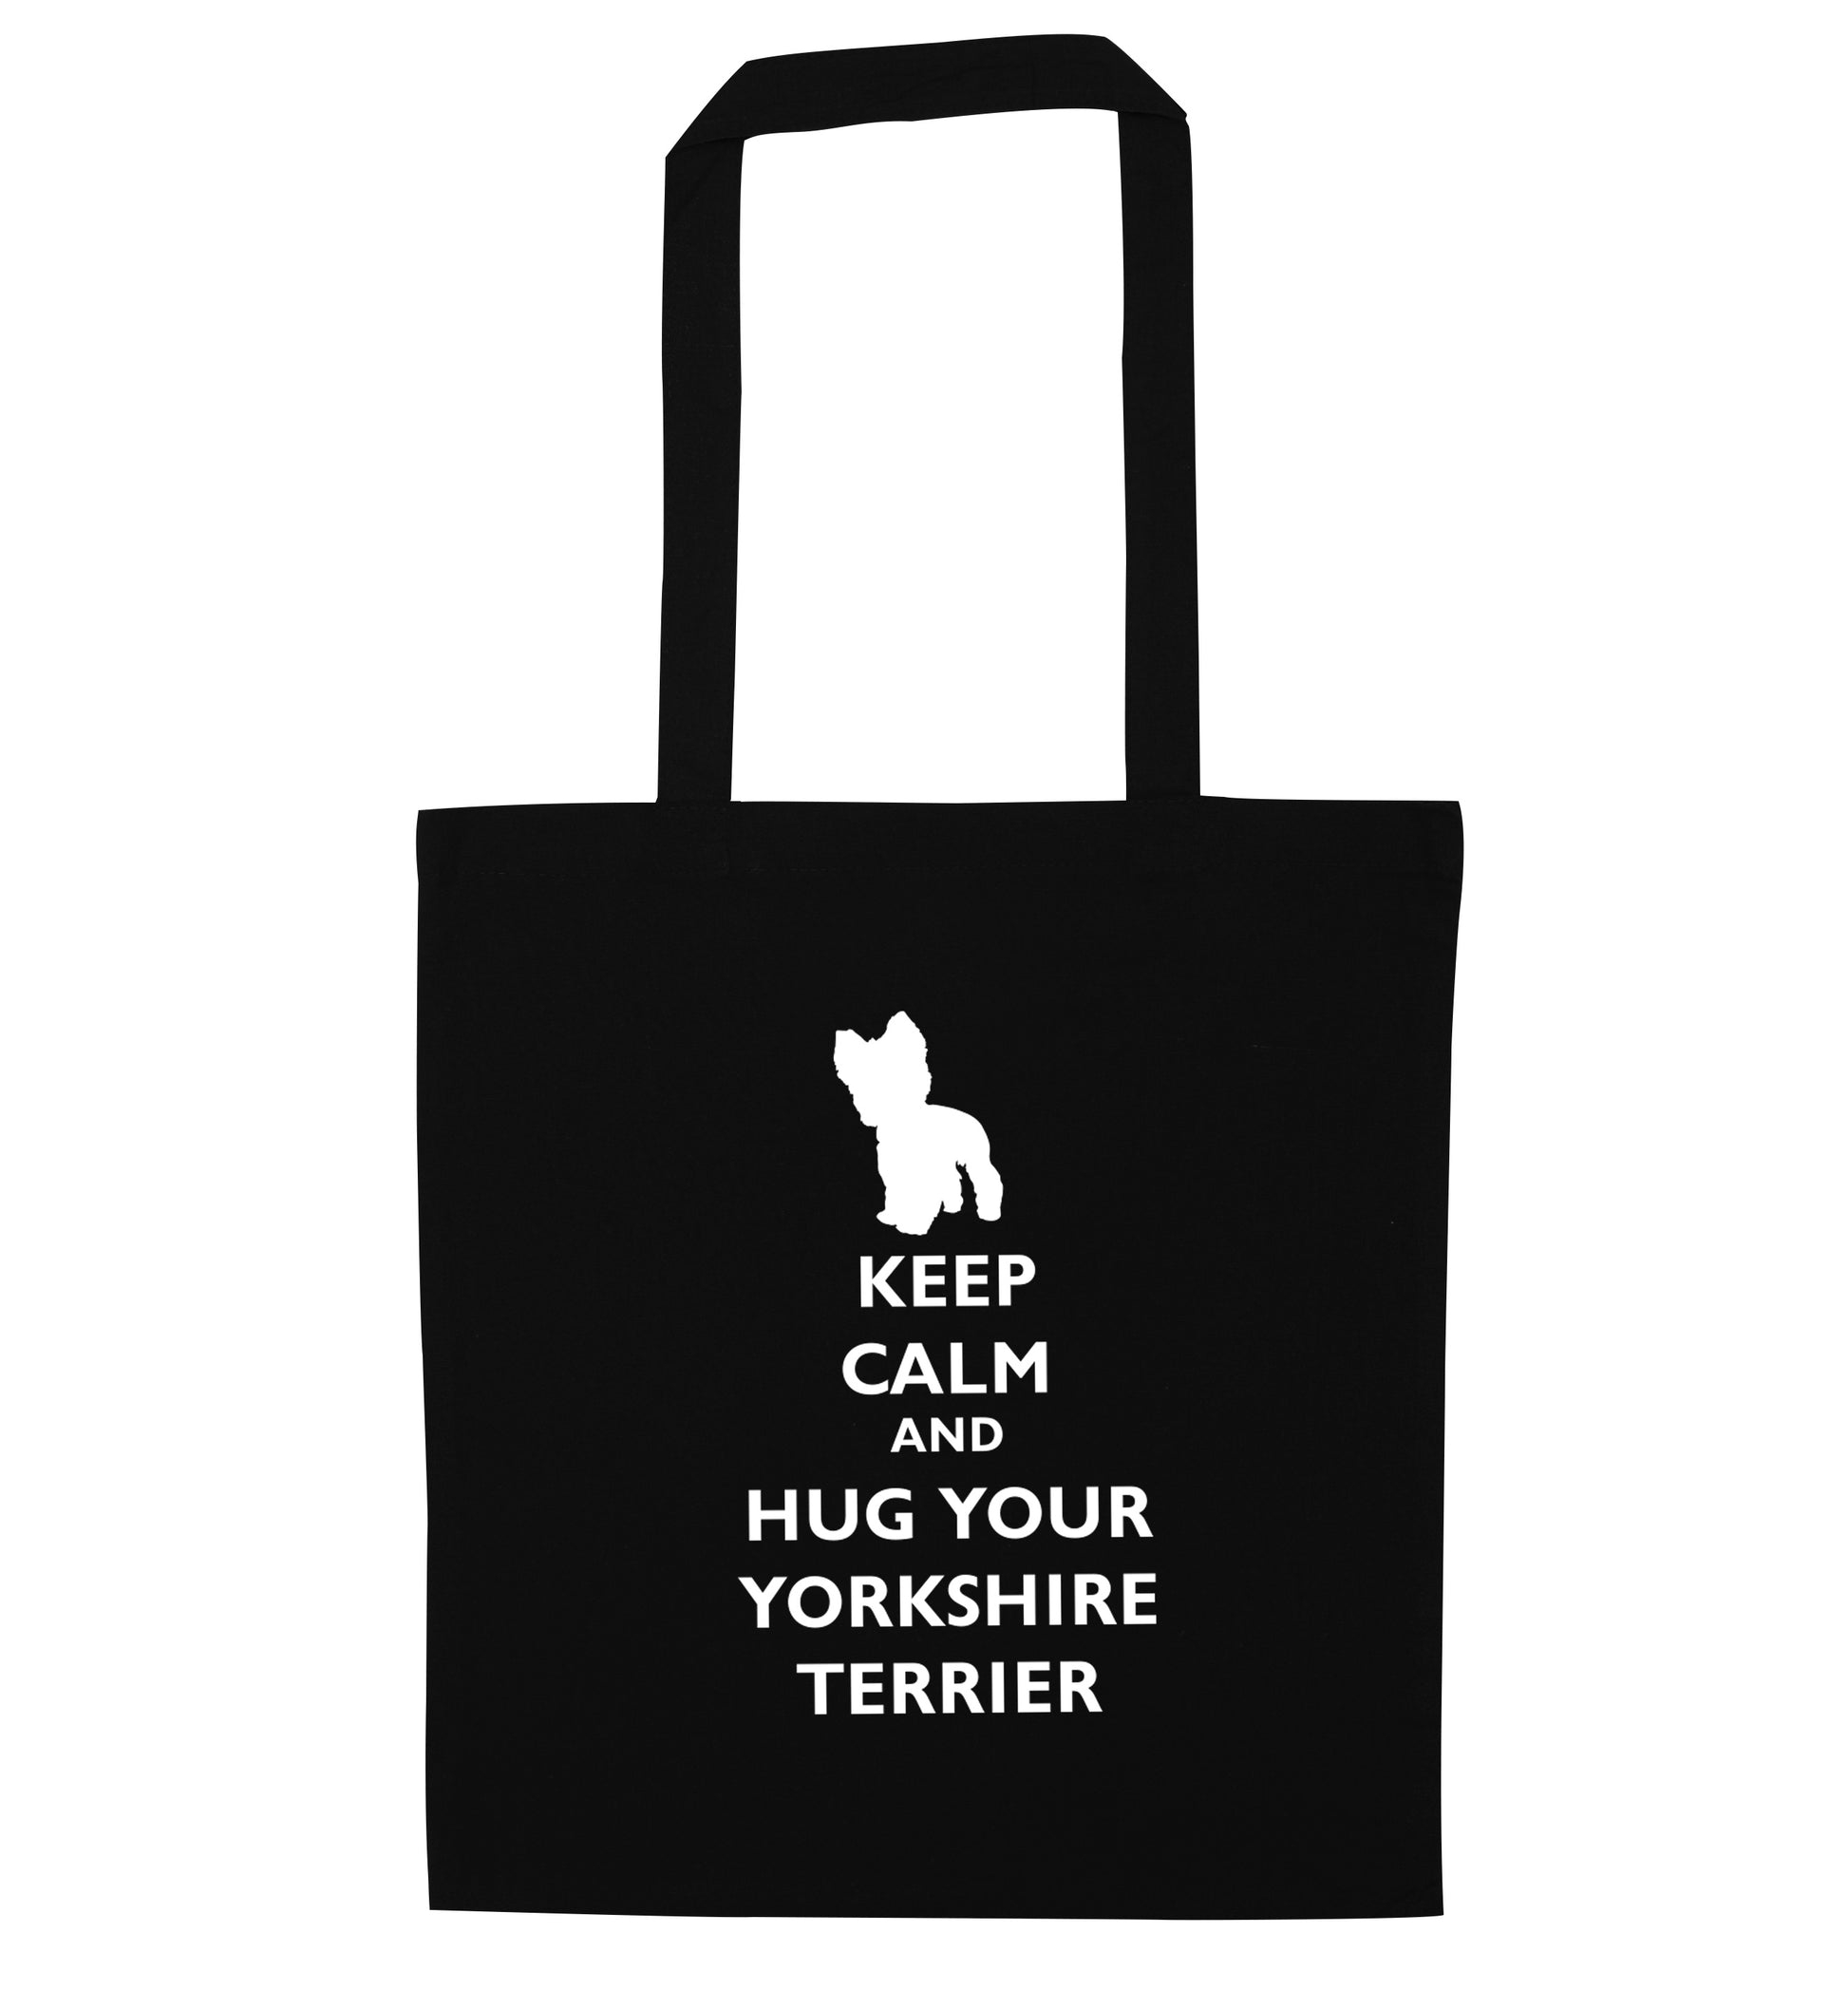 Keep calm and hug your yorkshire terrier black tote bag